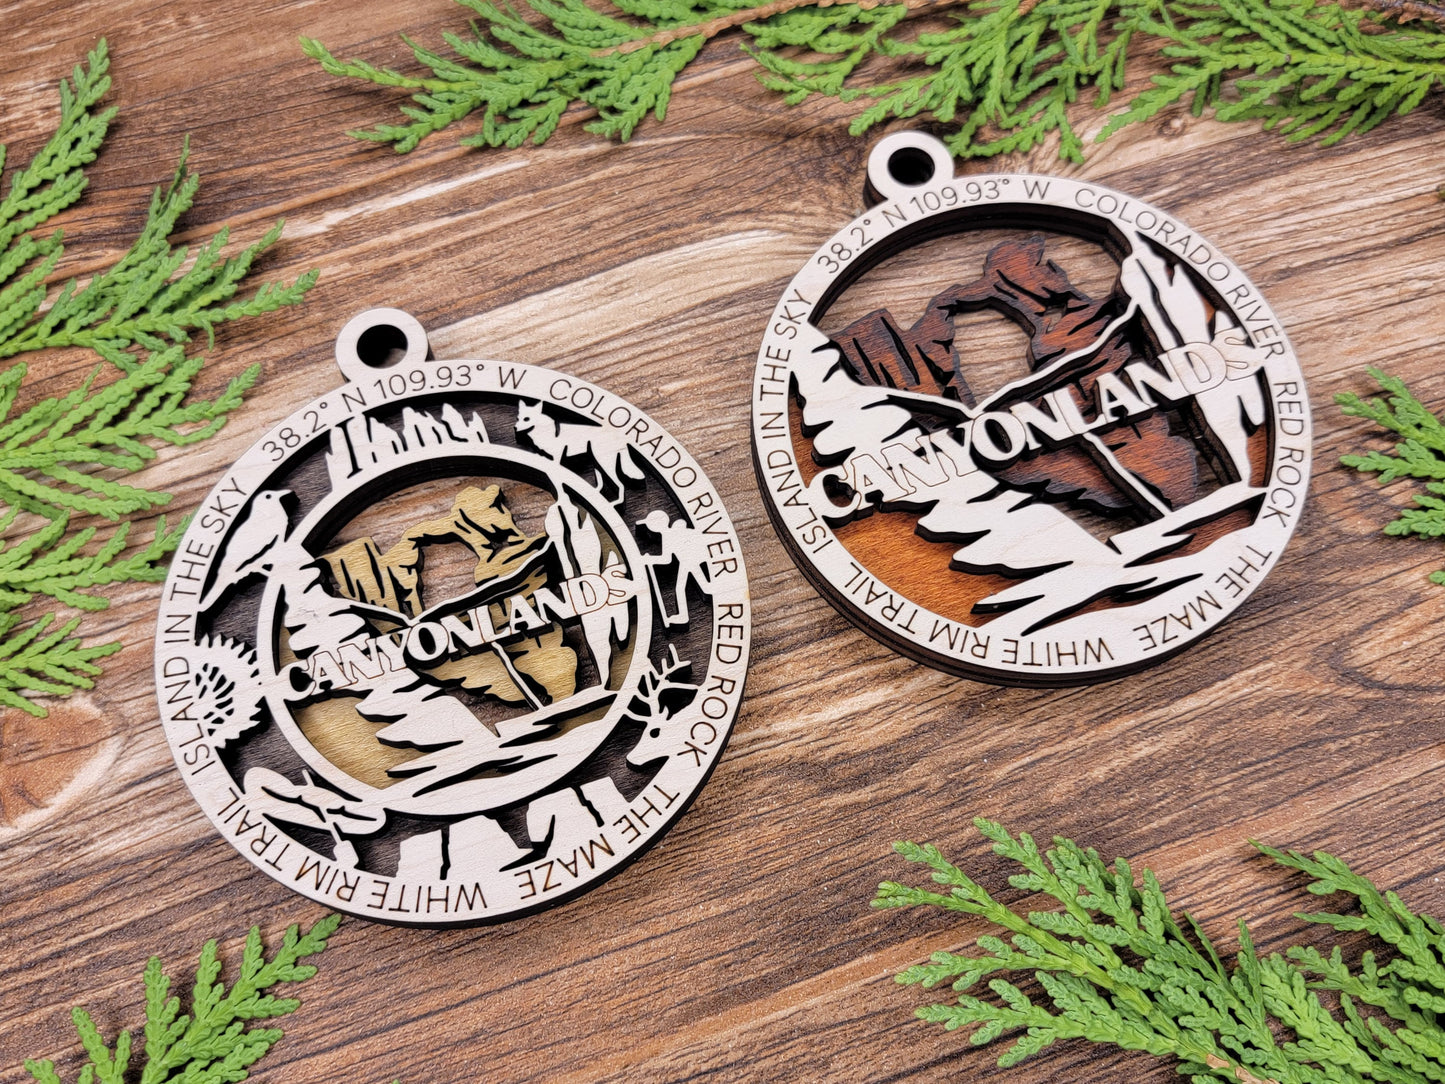 Canyonlands Park Ornament - Includes 2 Ornaments - Laser Design SVG, PDF, AI File Download - Tested On Glowforge and LightBurn